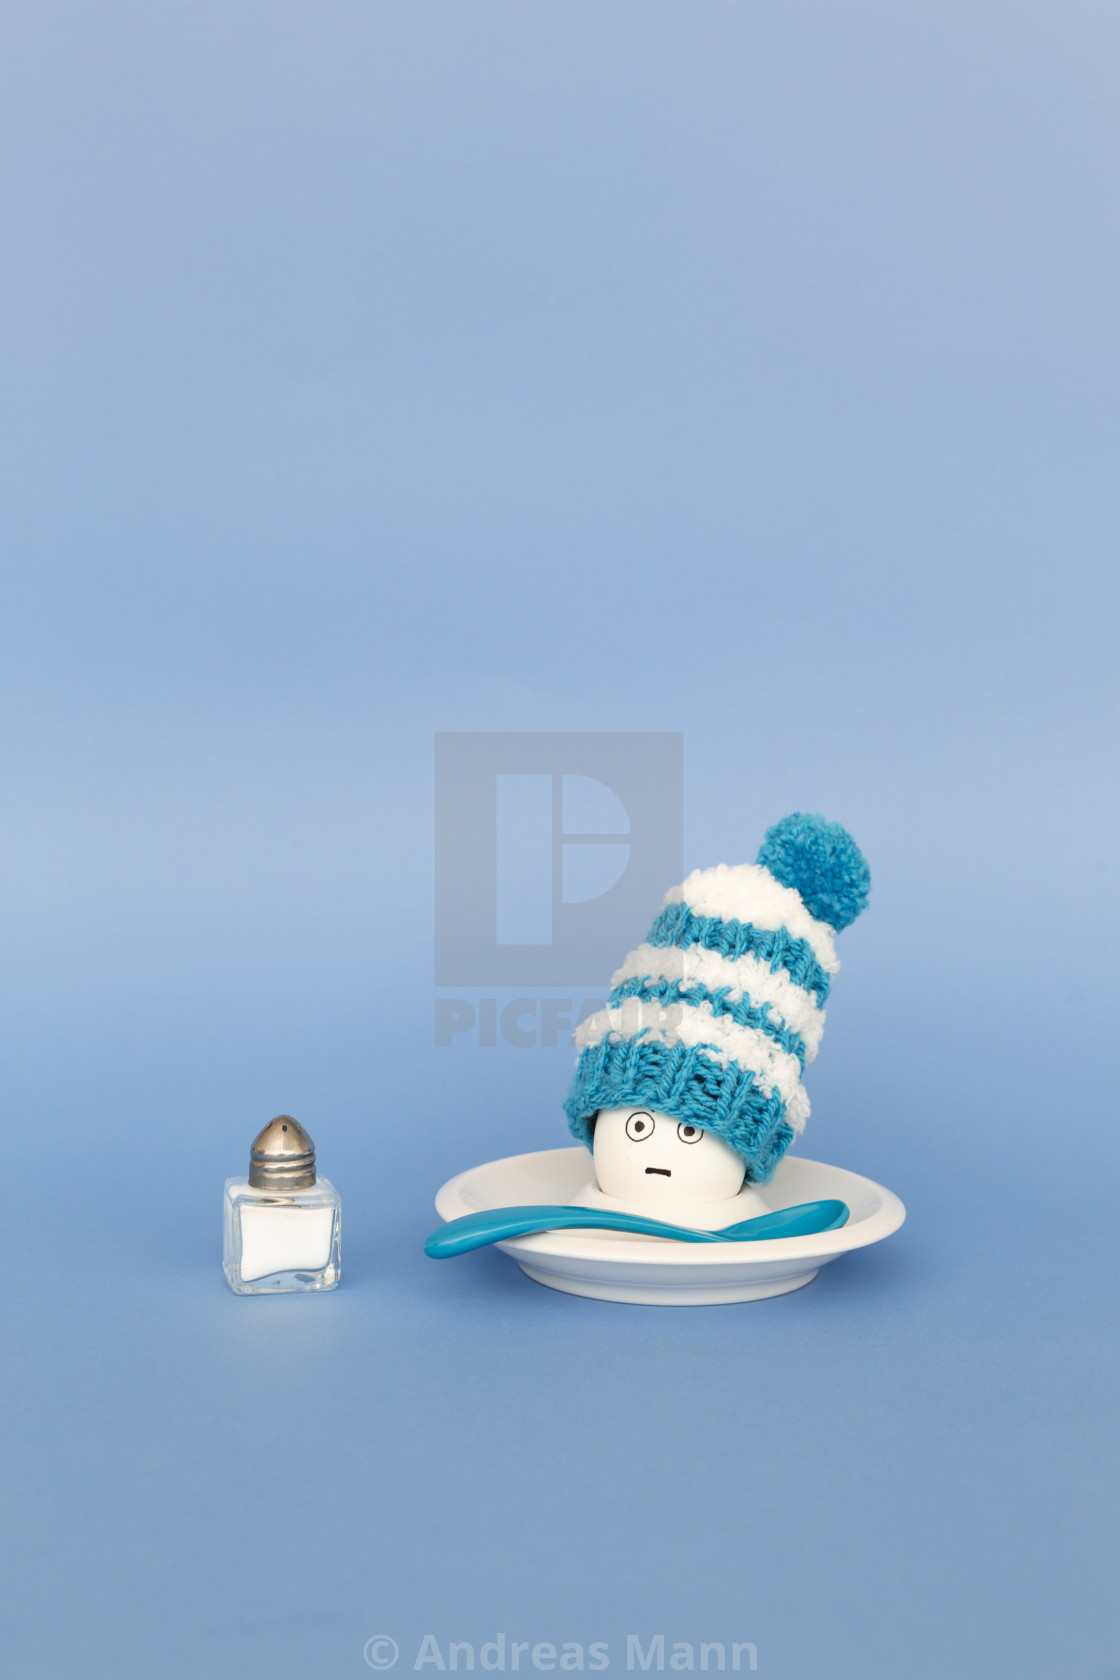 "Funny breakfast concept with a boiled egg wearing a wooly hat" stock image